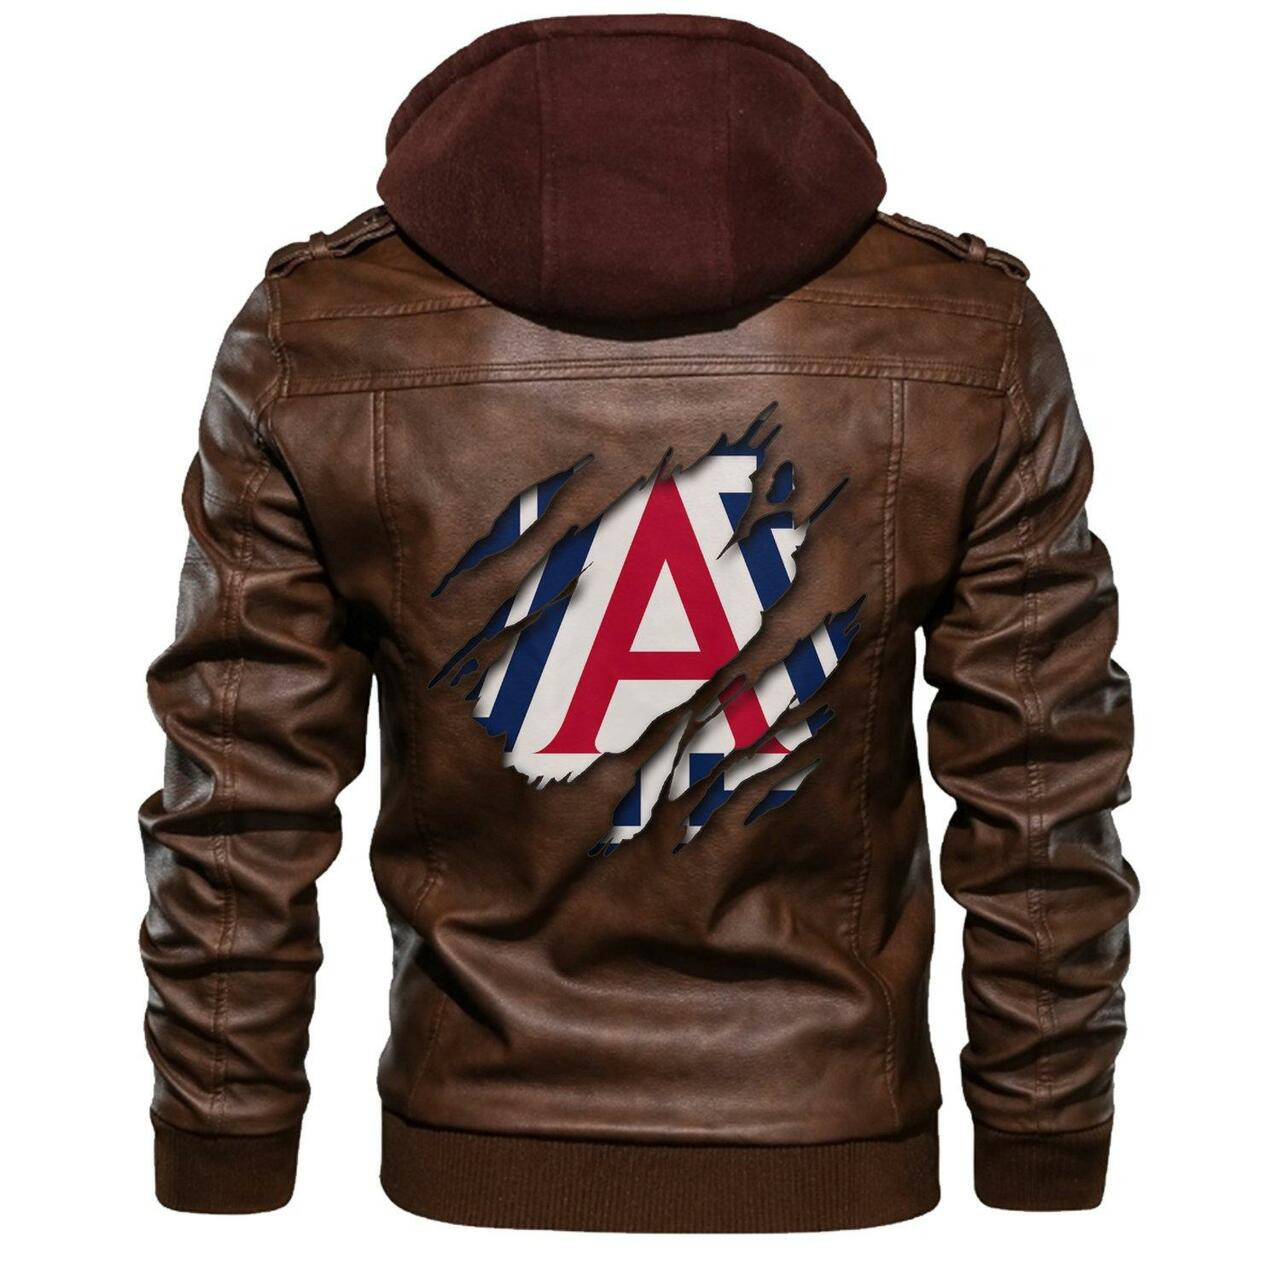 Top leather jackets are the perfect choice for the active man. 291